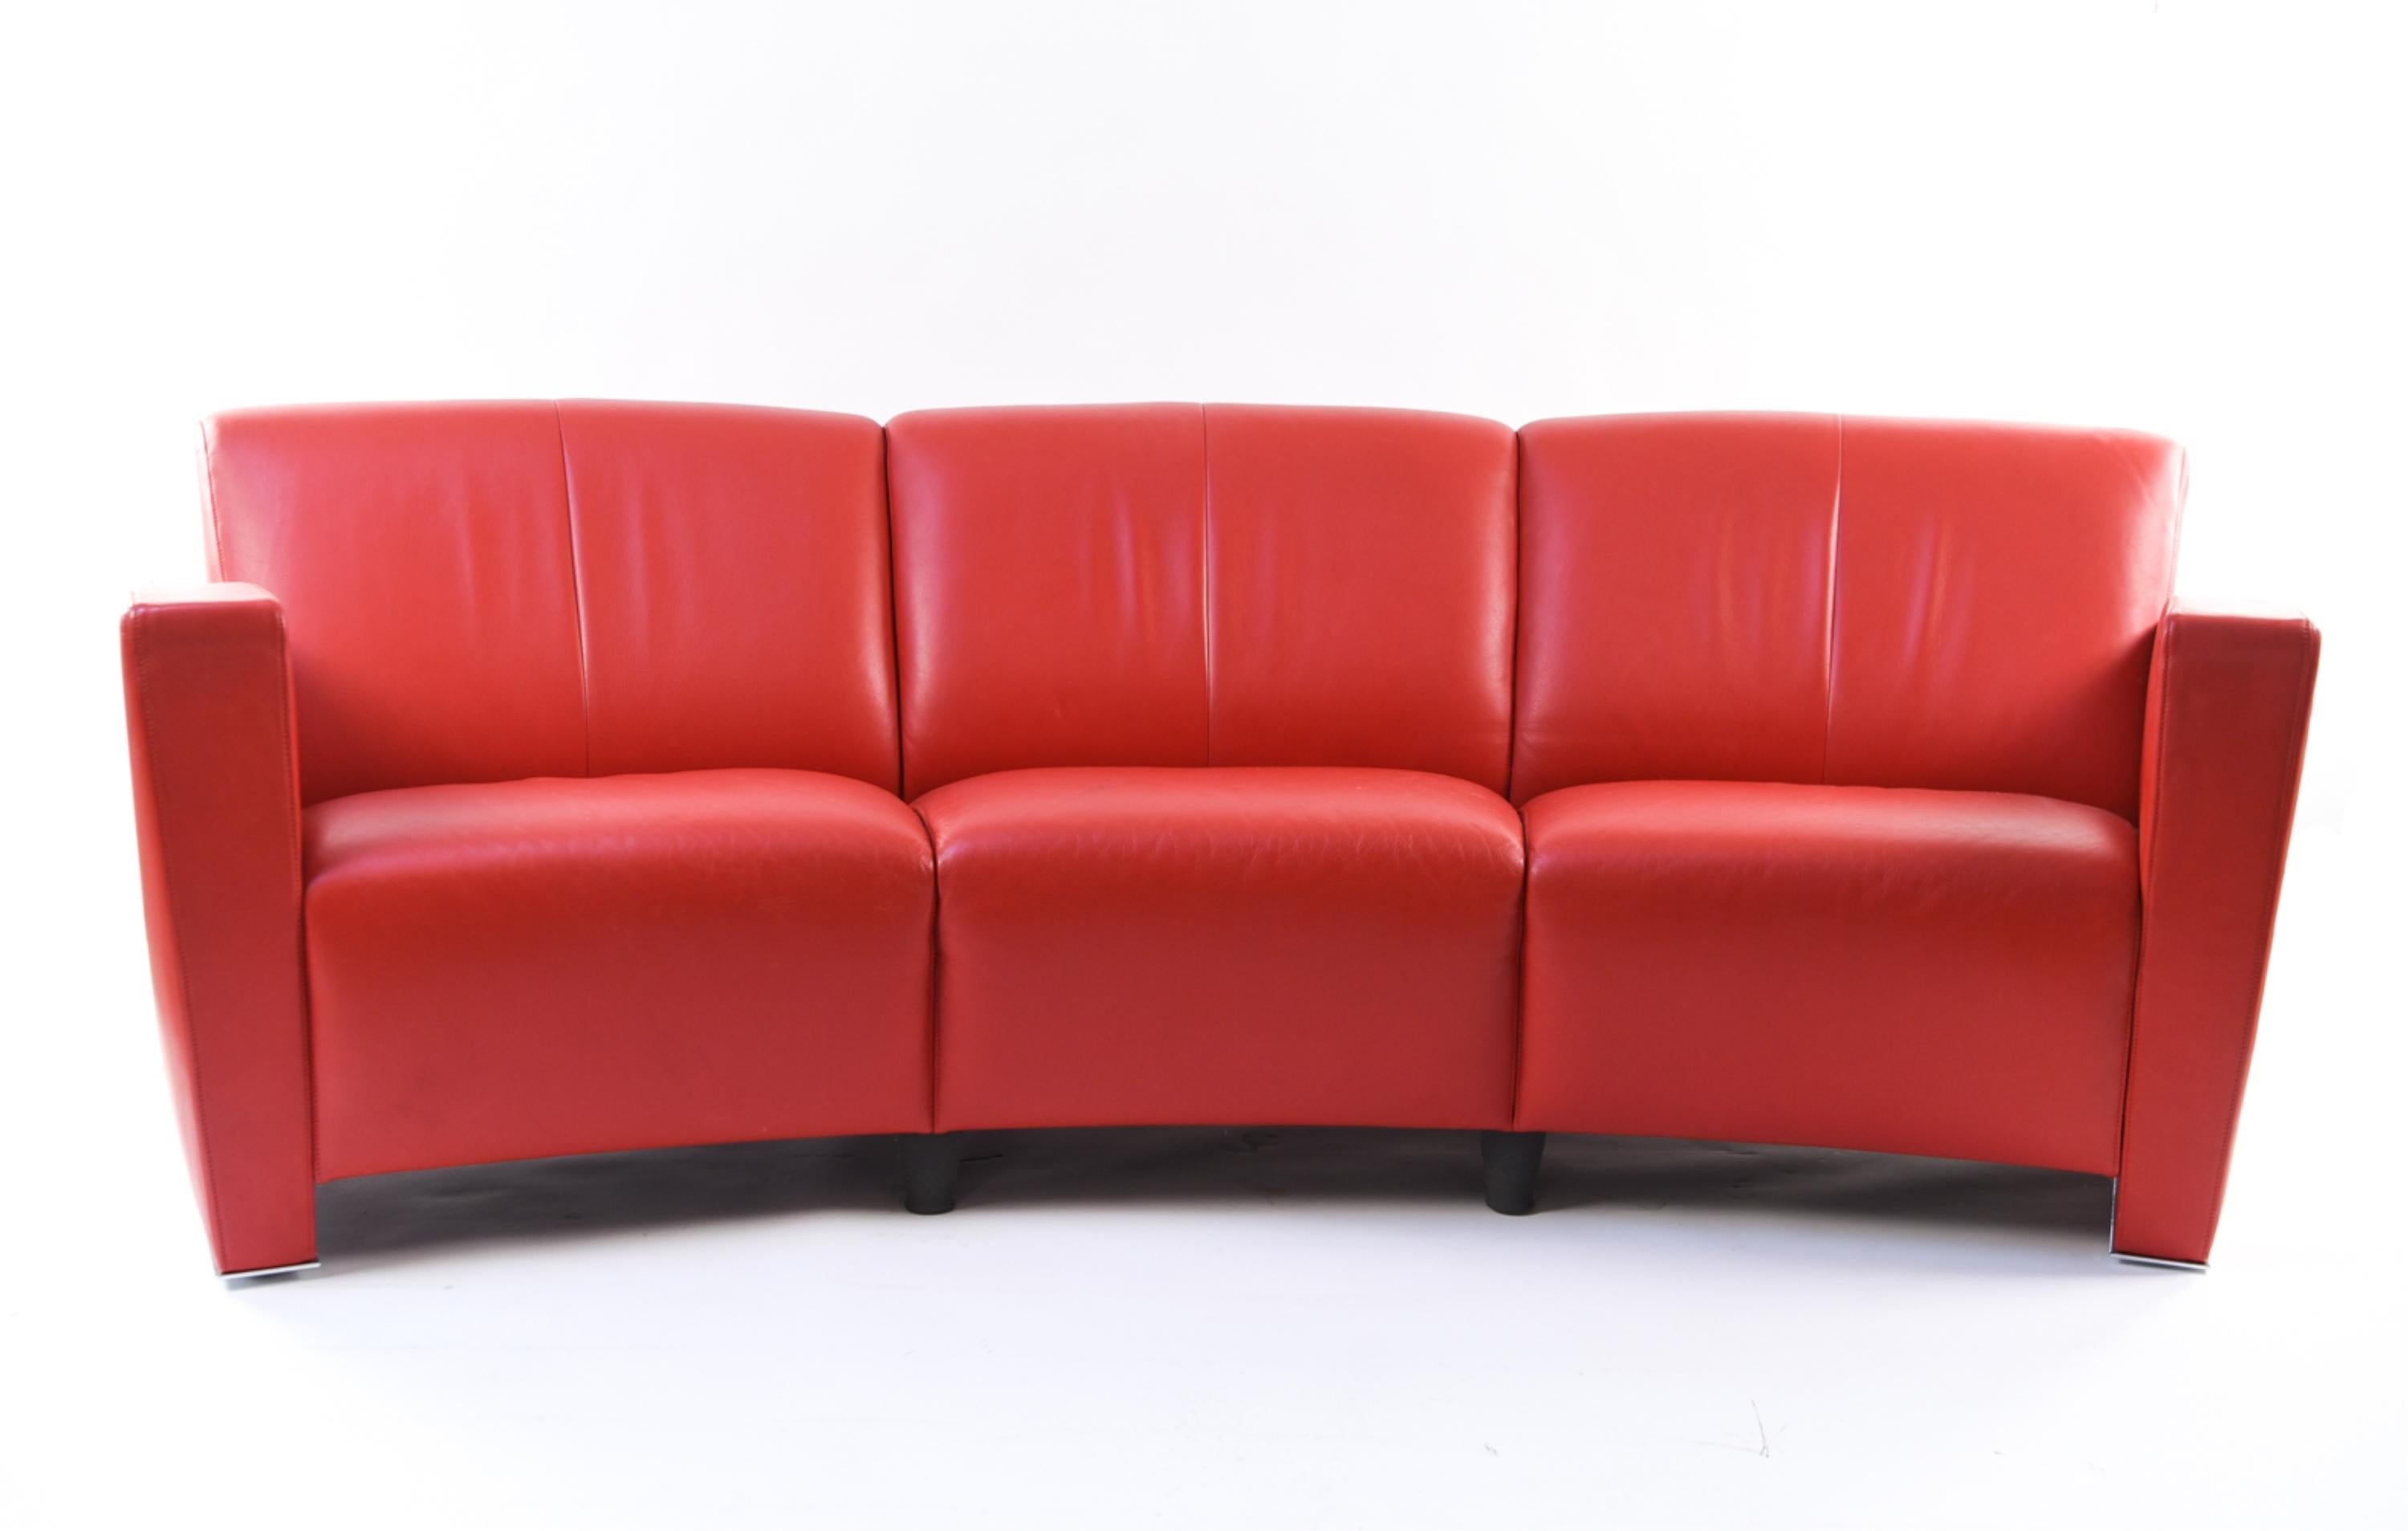 This eye-catching red crescent form sofa will be the statement piece of any living space.